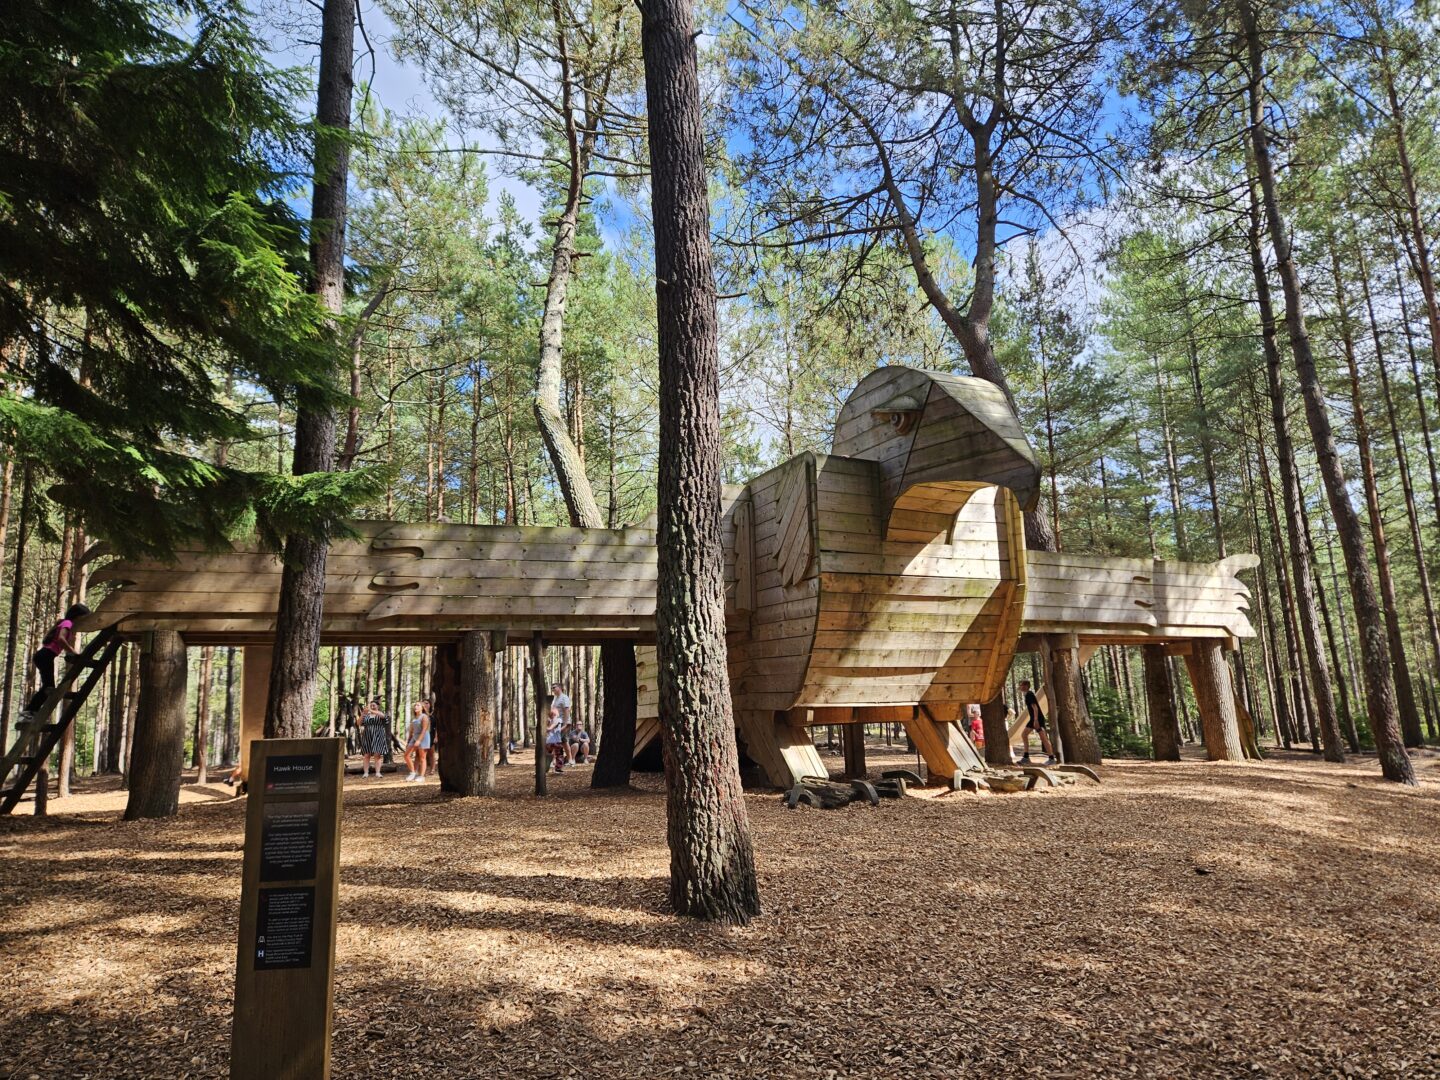 huge wooden play structure shaped like a hawk stands in a clearing in a forest